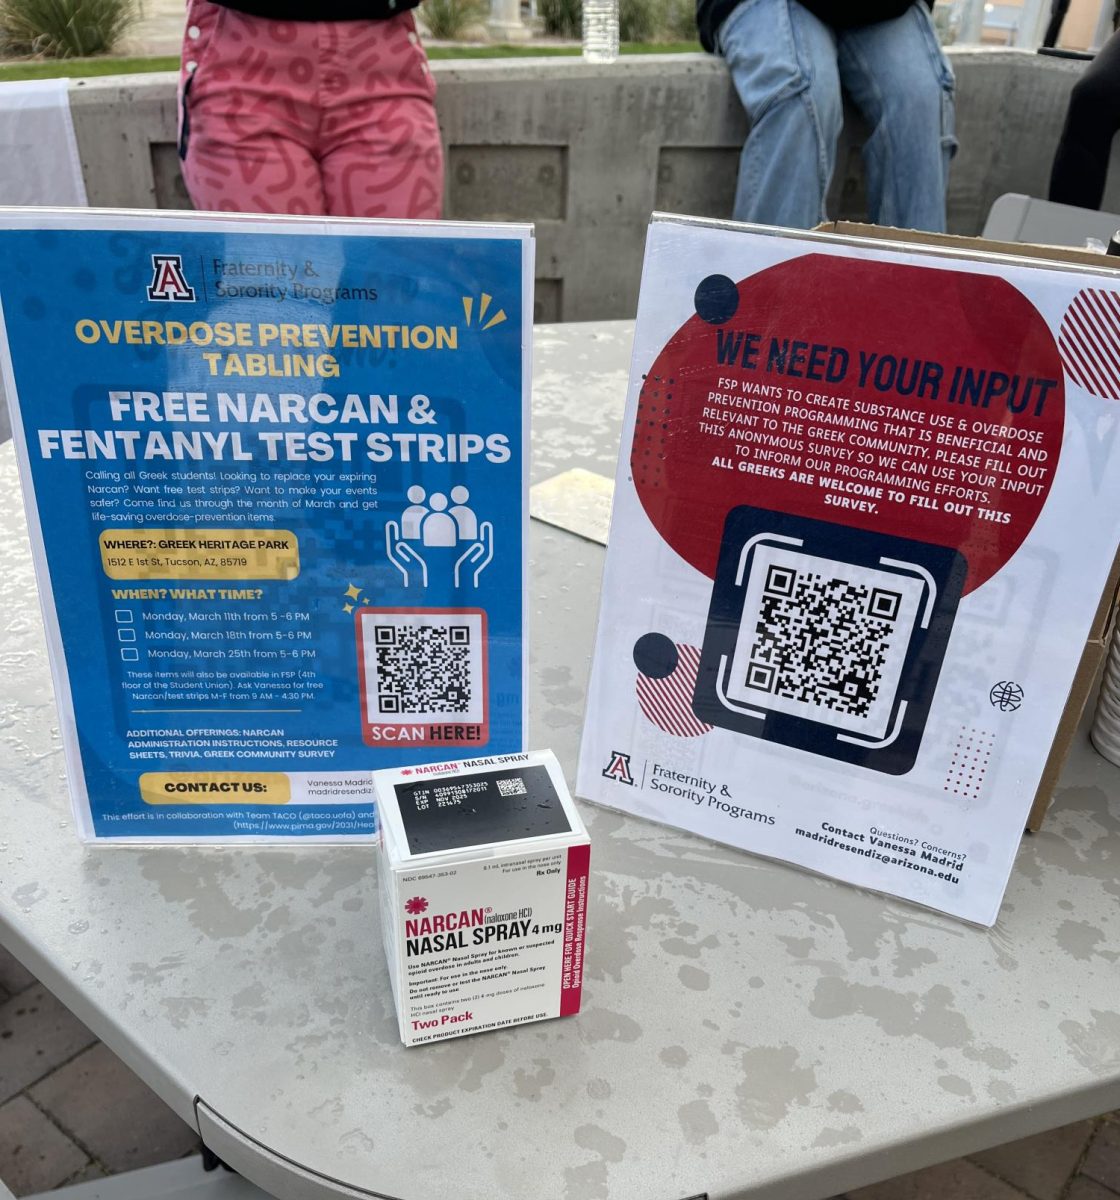 A box of Narcan and QR Code surveys for students to fill out during free Fentanyl and Narcan handout provided by UA TACO and Fraternity and Sorority Programs on March 25 at Greek Heritage Park on the University of Arizona Campus.